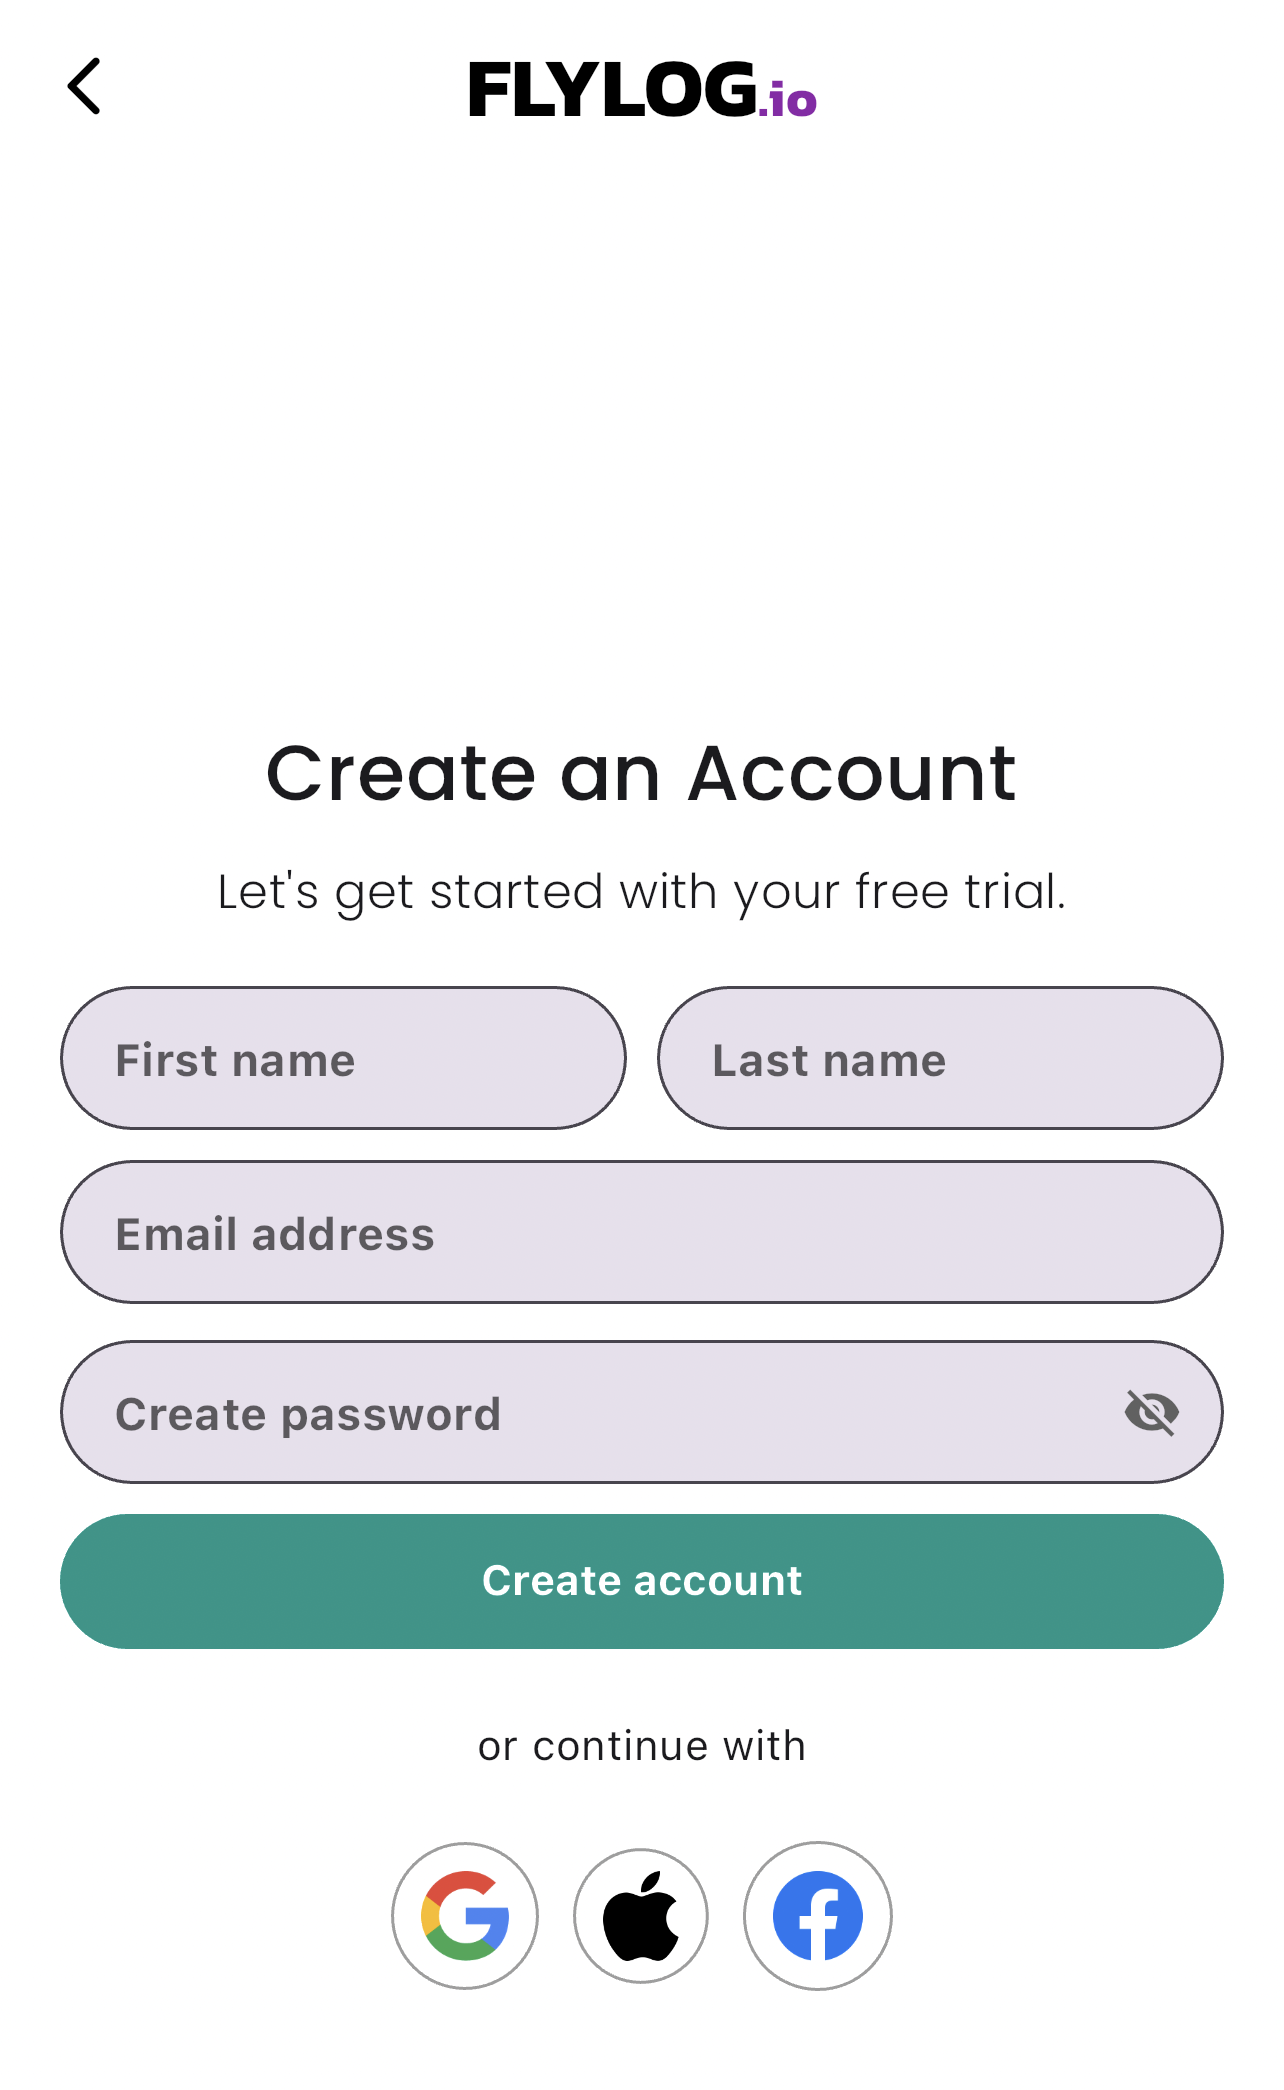 Account creation with email address